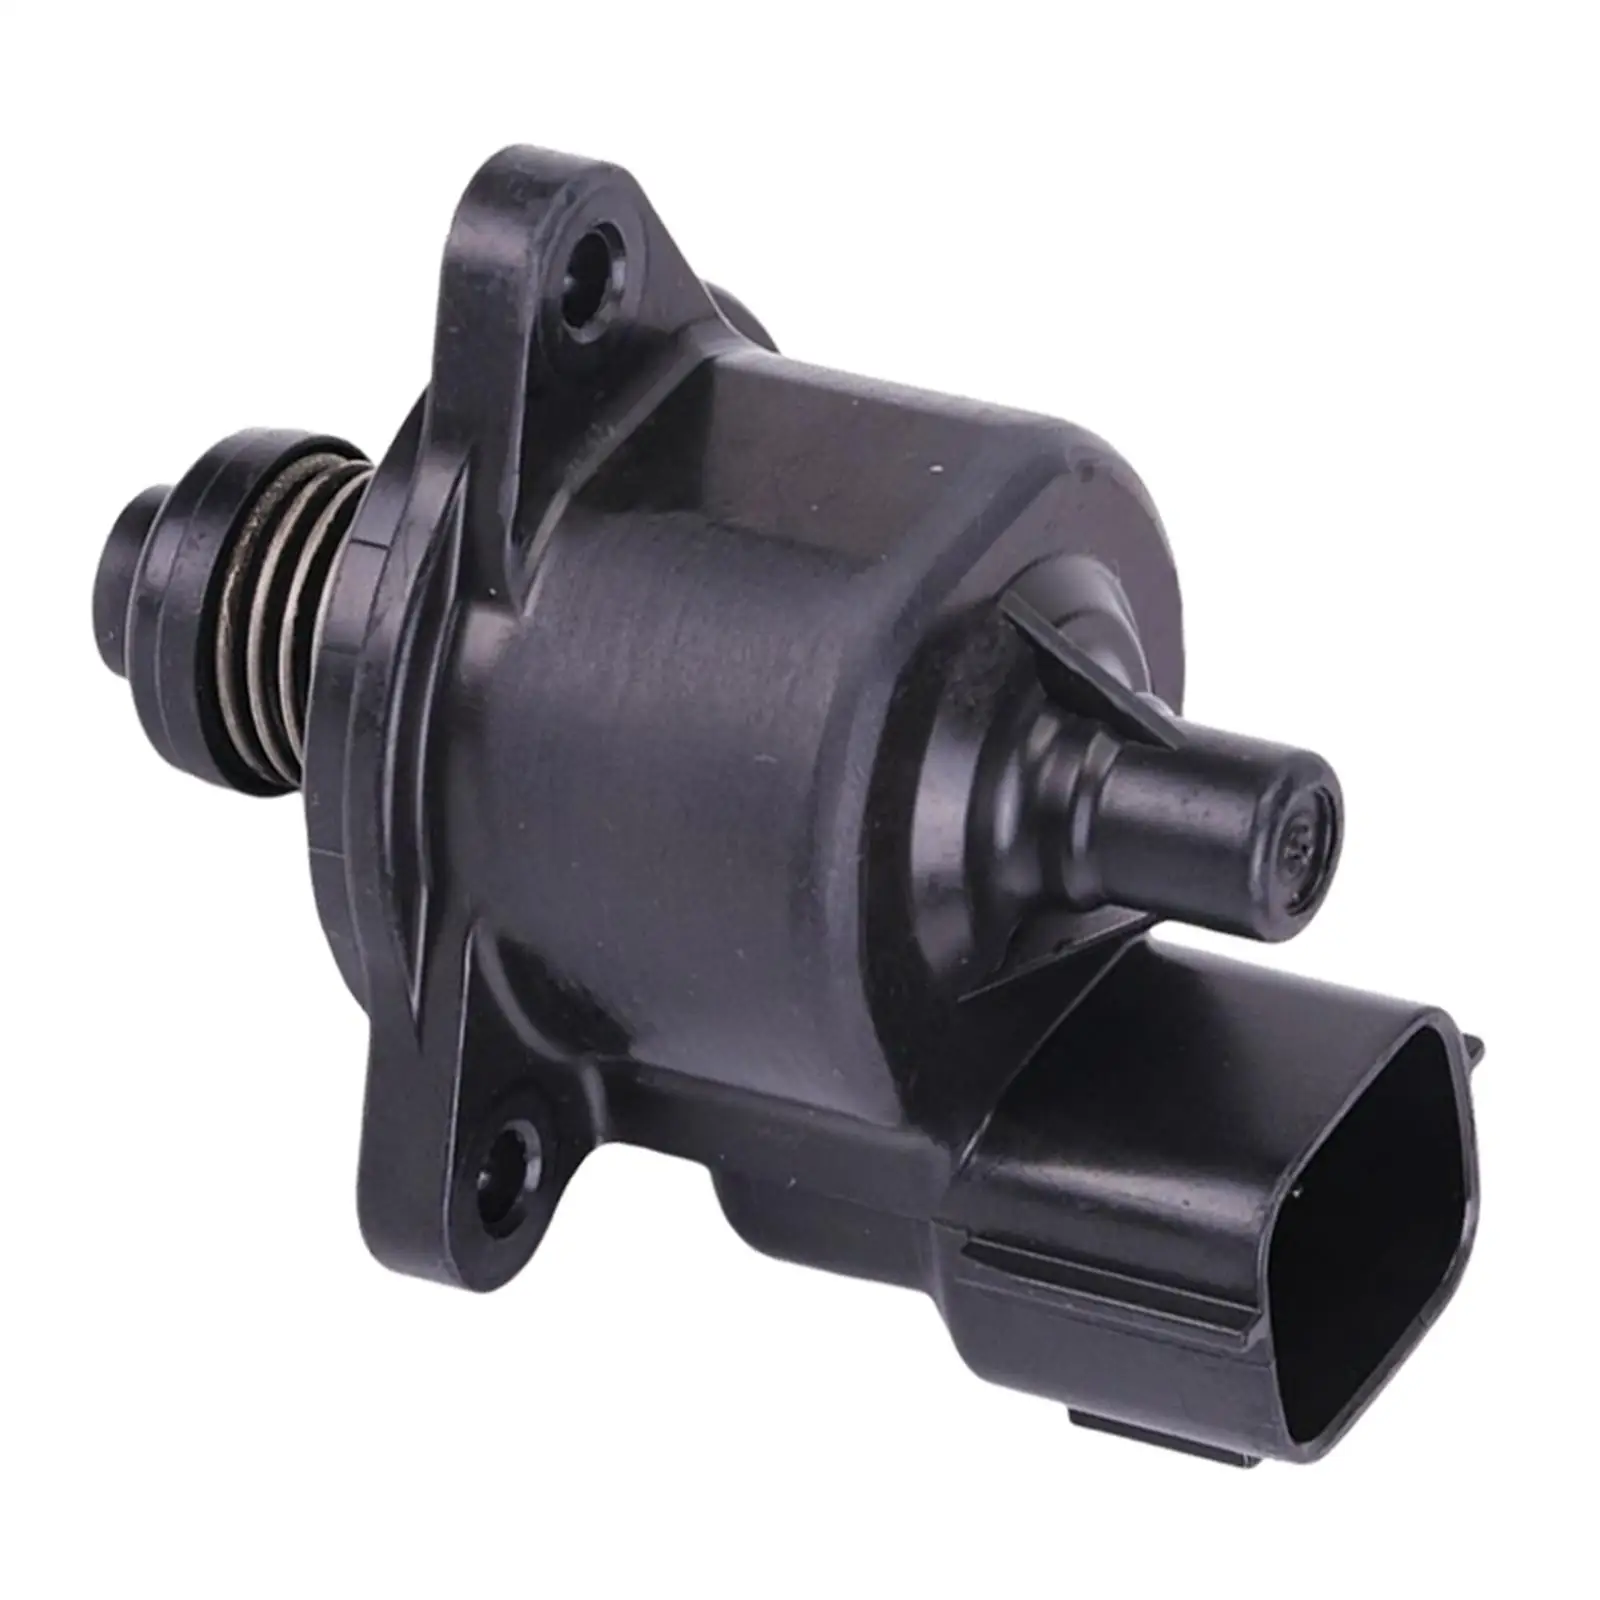 Idle Air Speed Control Valve 68V-1312A-00-00 Auto Parts Car Accessories Motor for Outboard